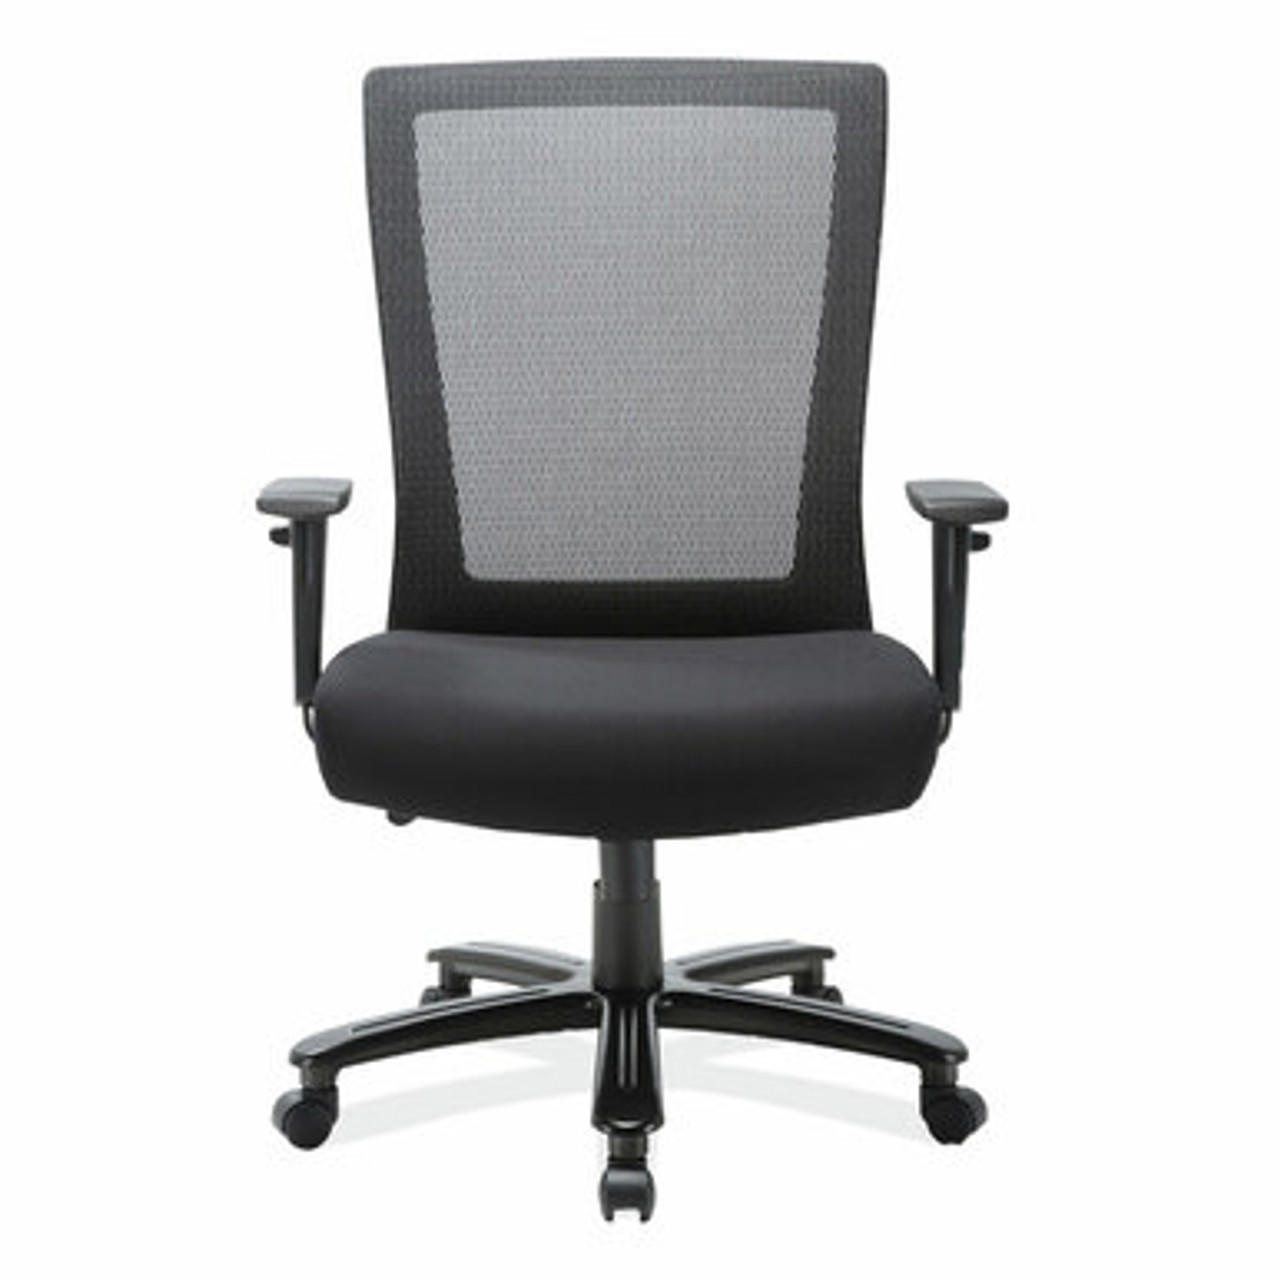  Office Source Big & Tall Collection 400 lb. Capacity Mesh Back Ergonomic Chair 44088AF 